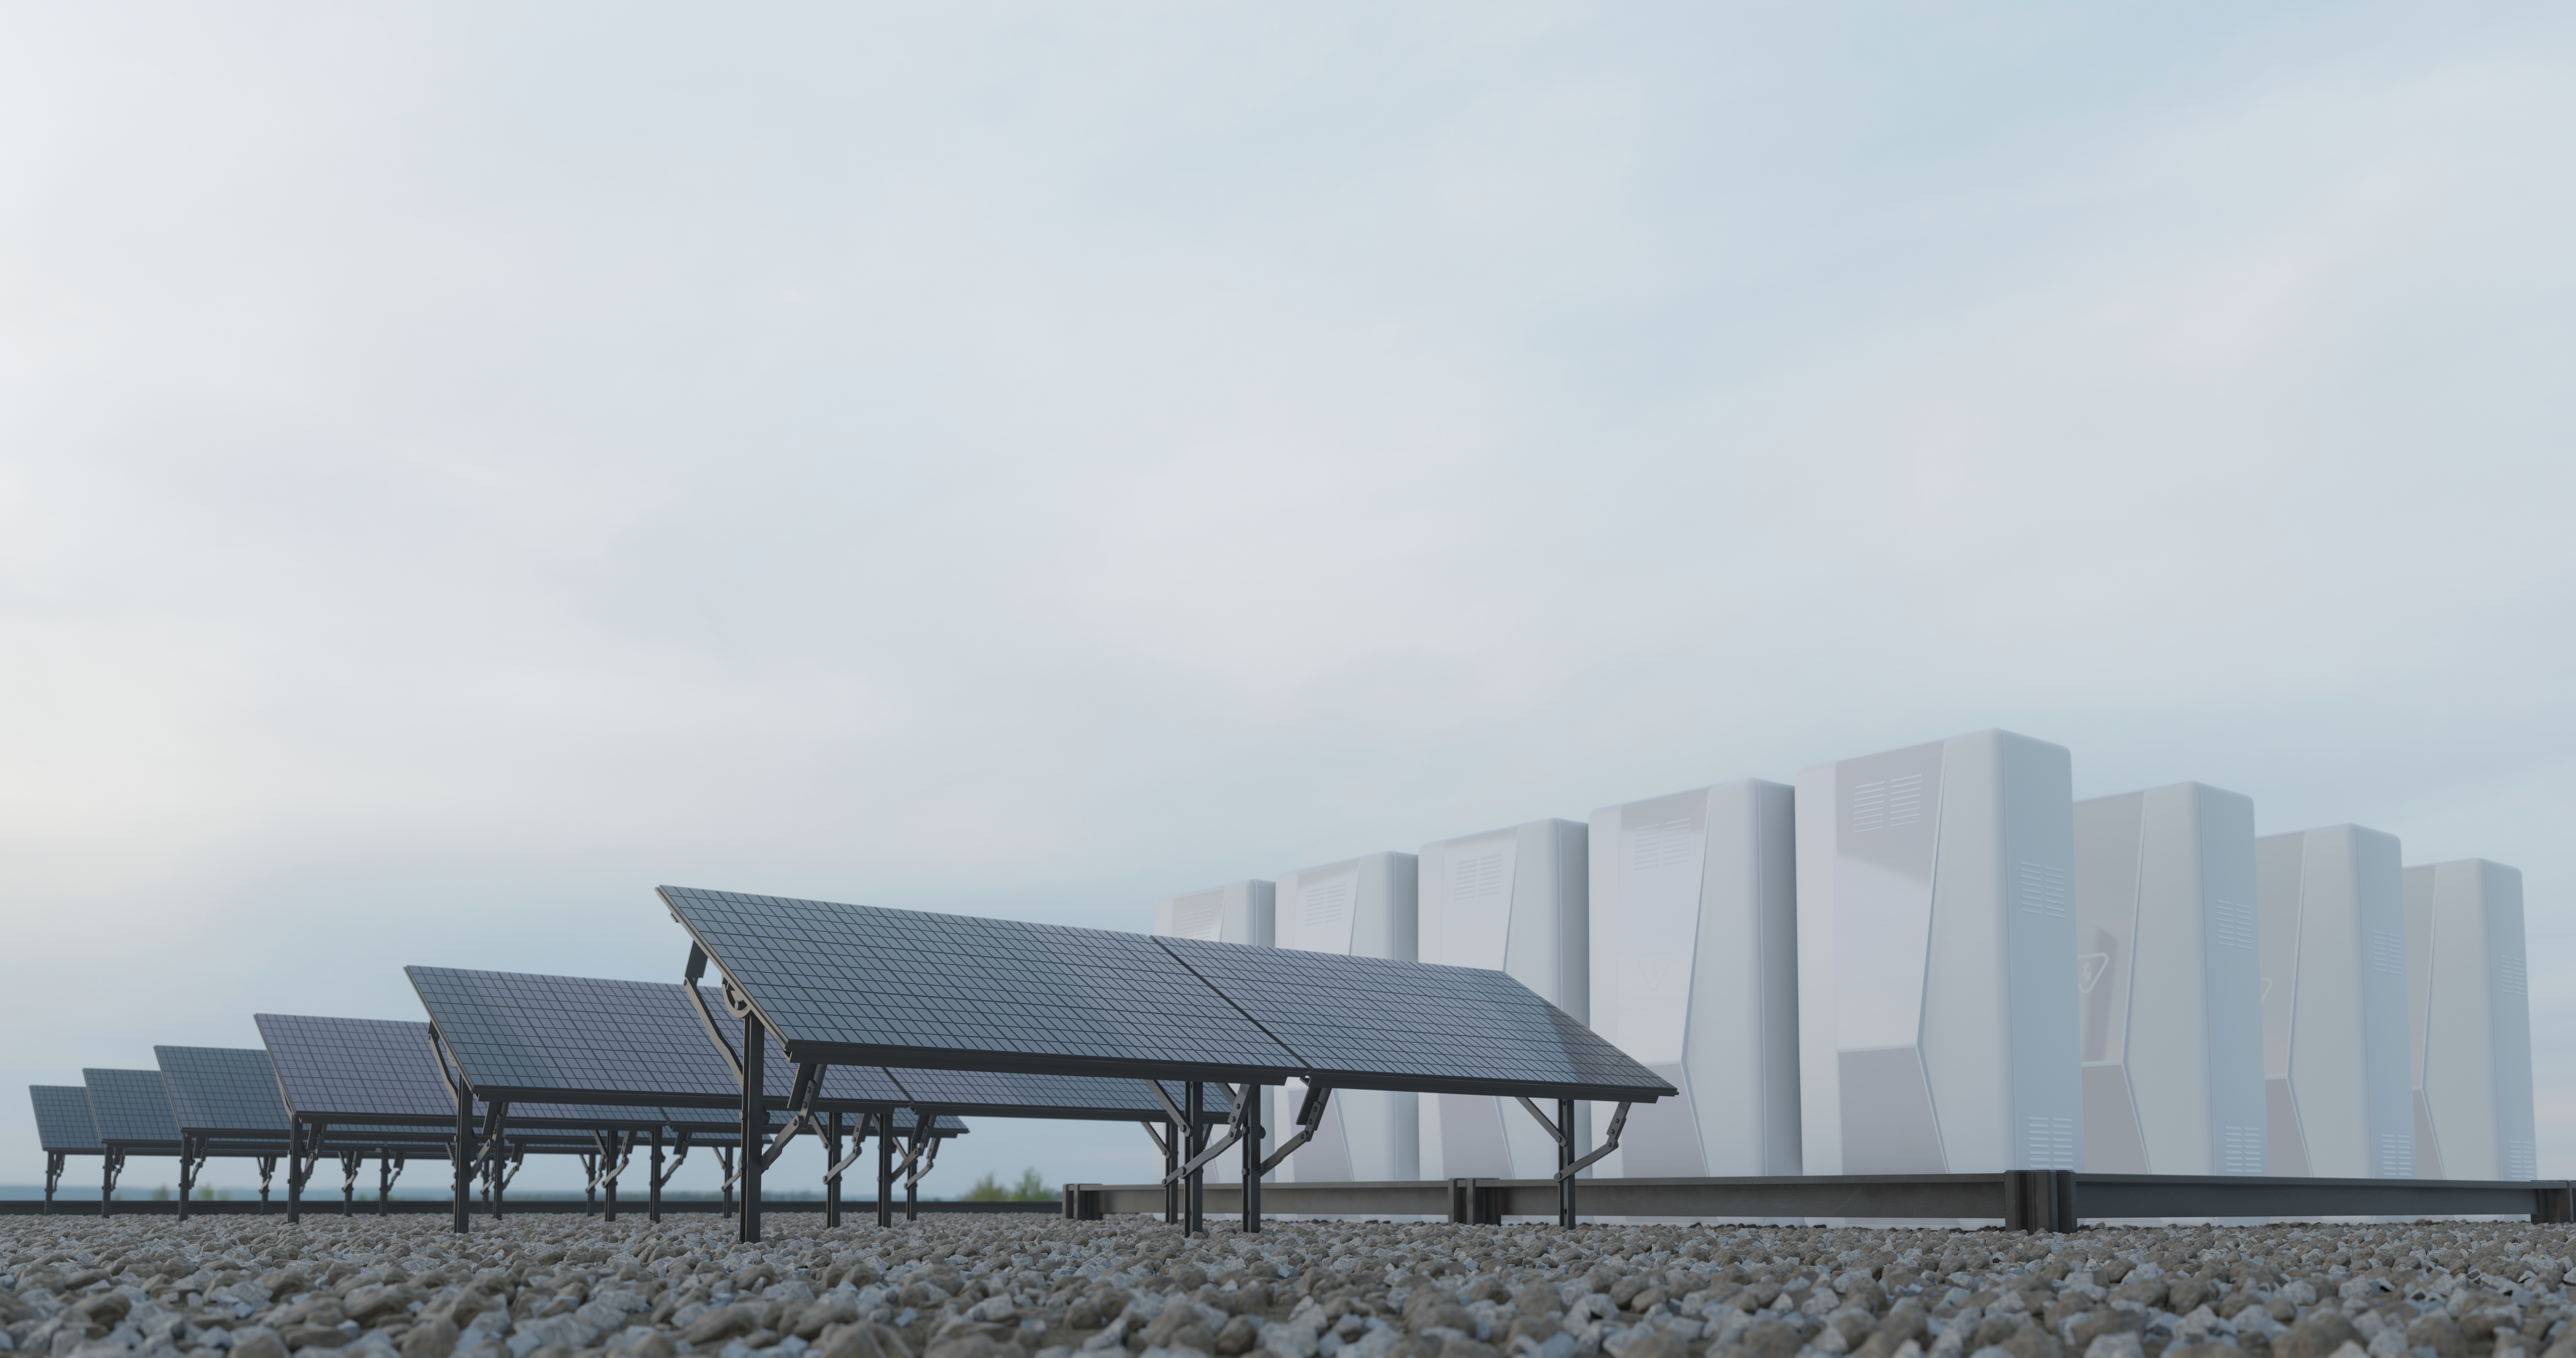 The Rise of Battery Energy Storage Systems in the Global Decarbonisation Movement